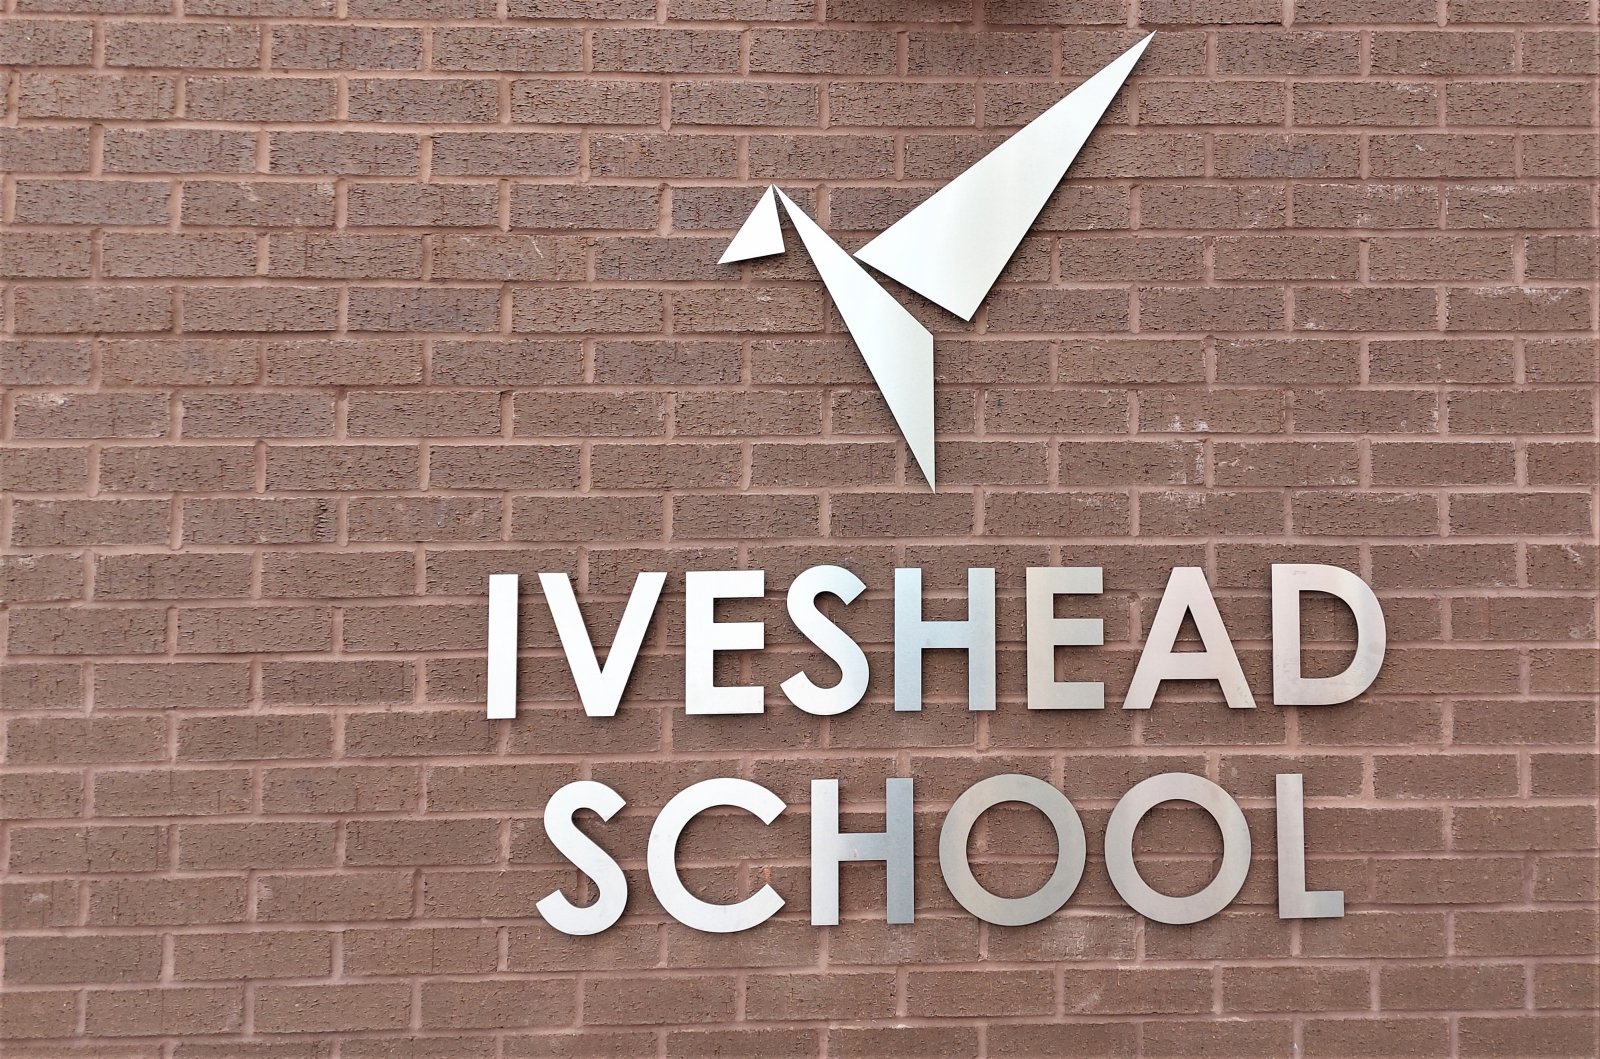 Iveshead School, Shepshed, Leicestershire